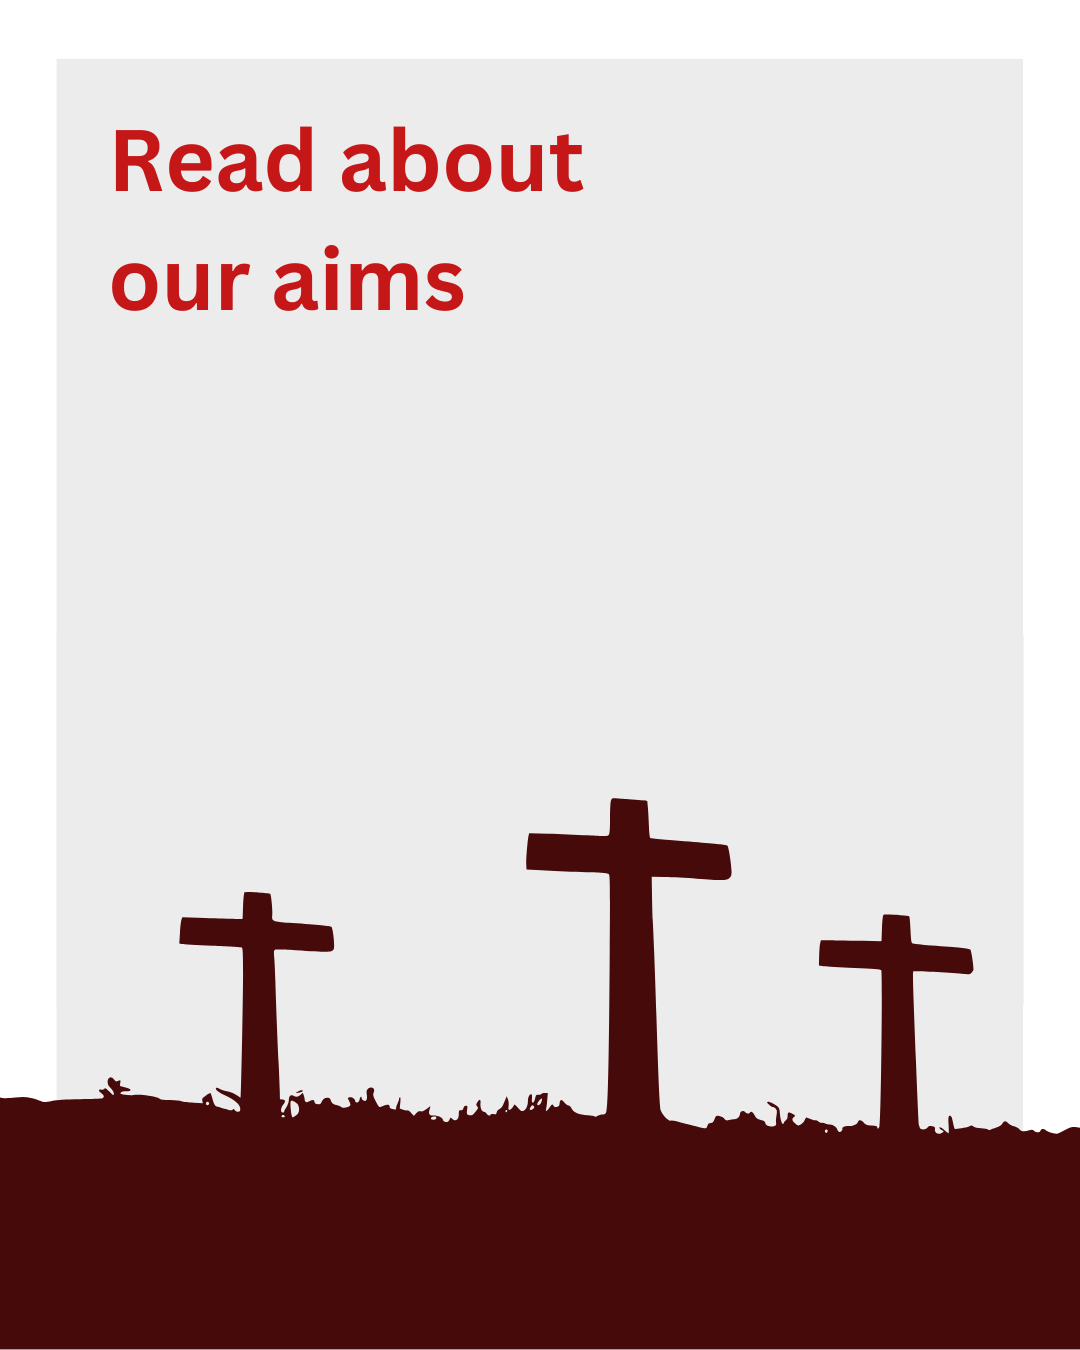 Read about our aims. Image shows a silhouette of three crosses.